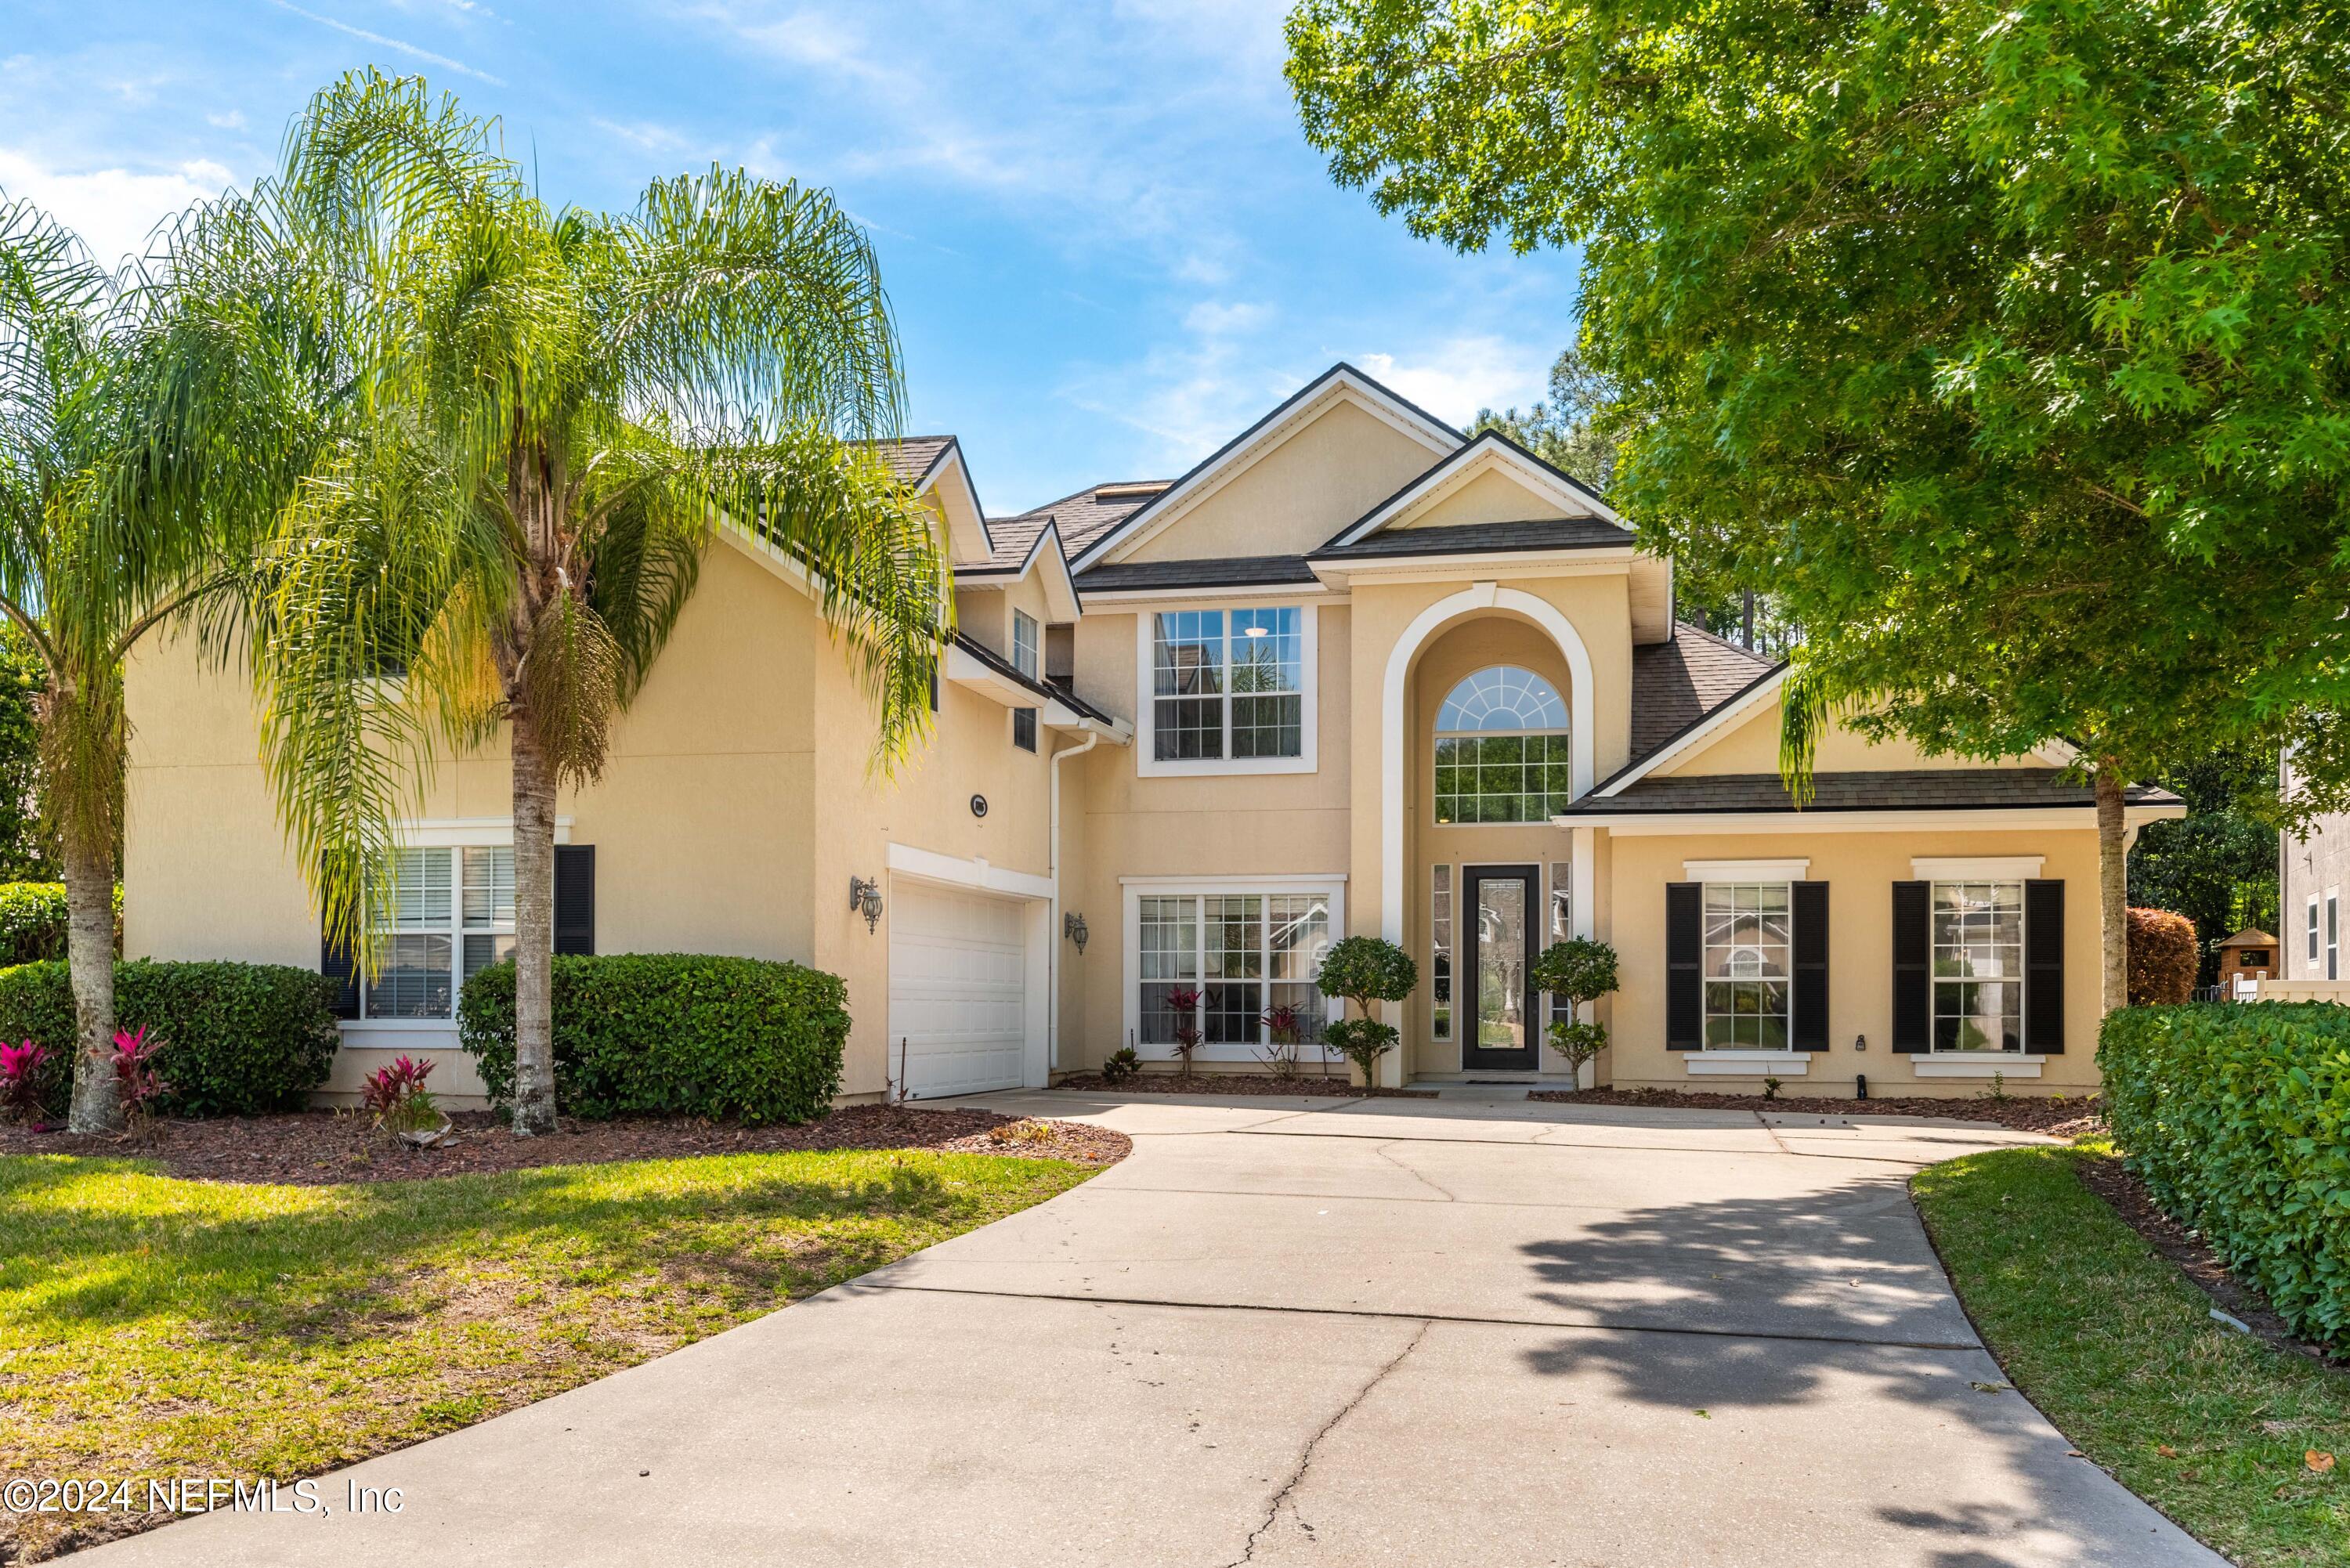 St Johns, FL home for sale located at 1205 Crabapple Court, St Johns, FL 32259